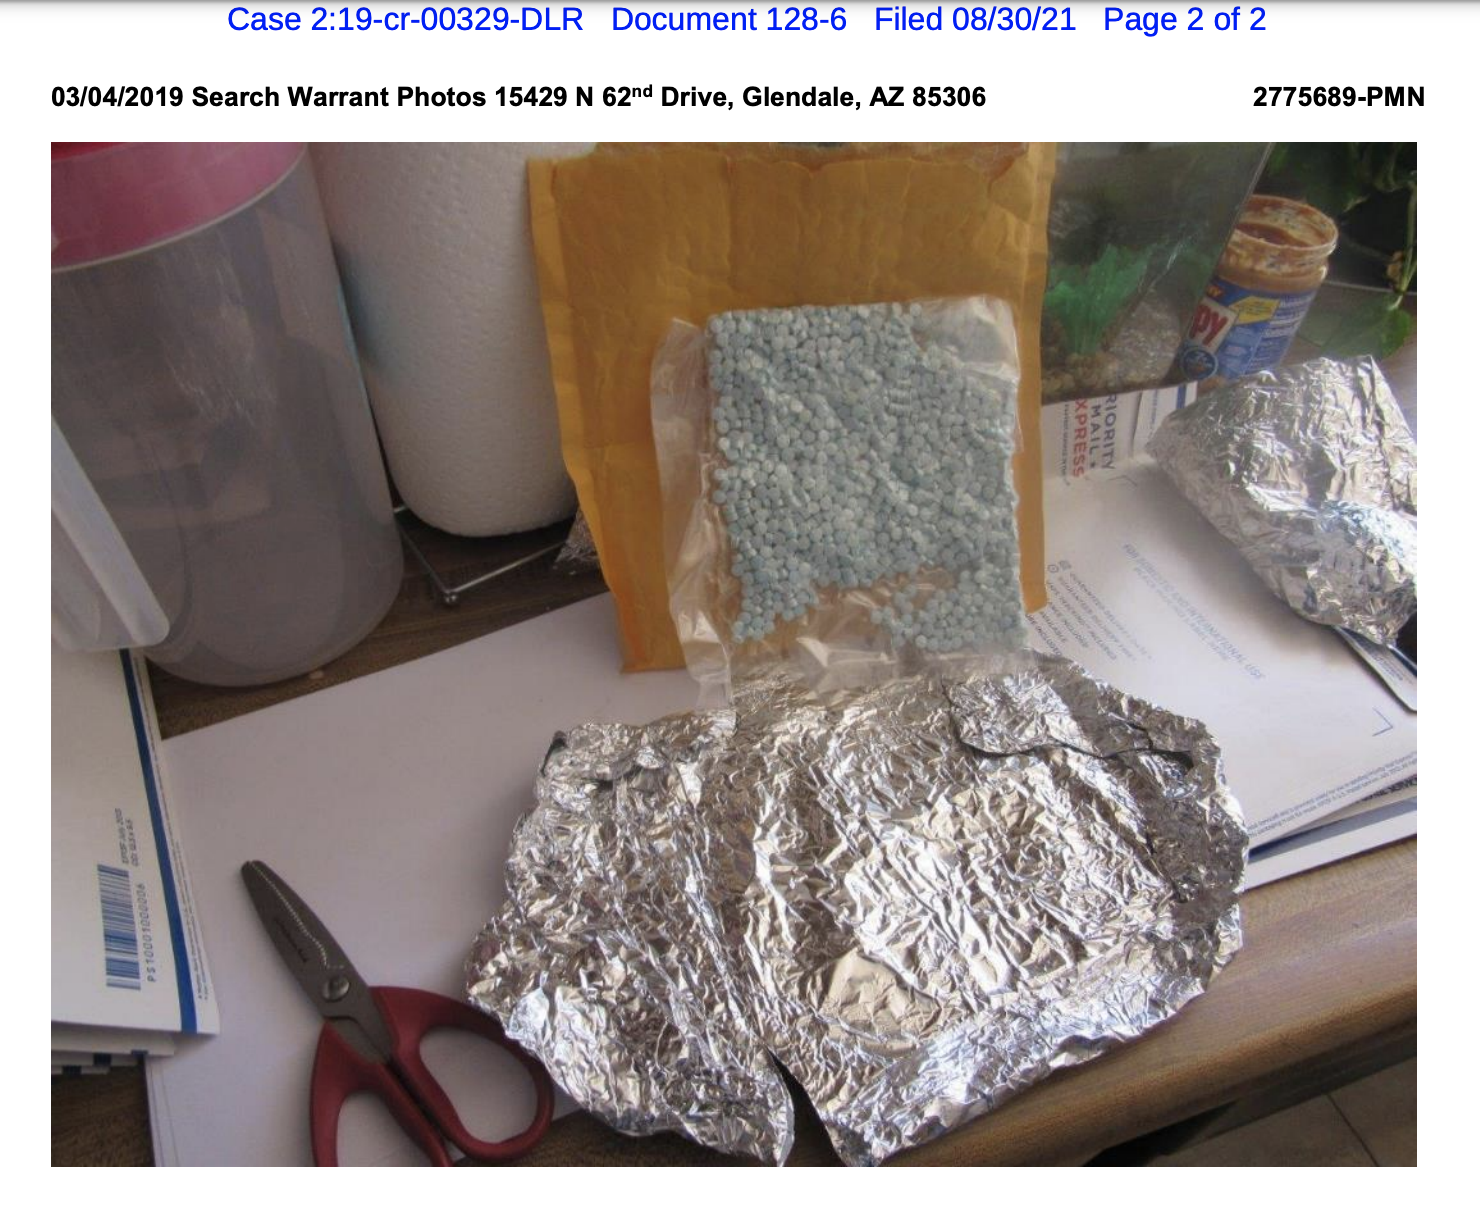 blue pills in sealed plastic propped against a manilla envelope on a surface with tin foil